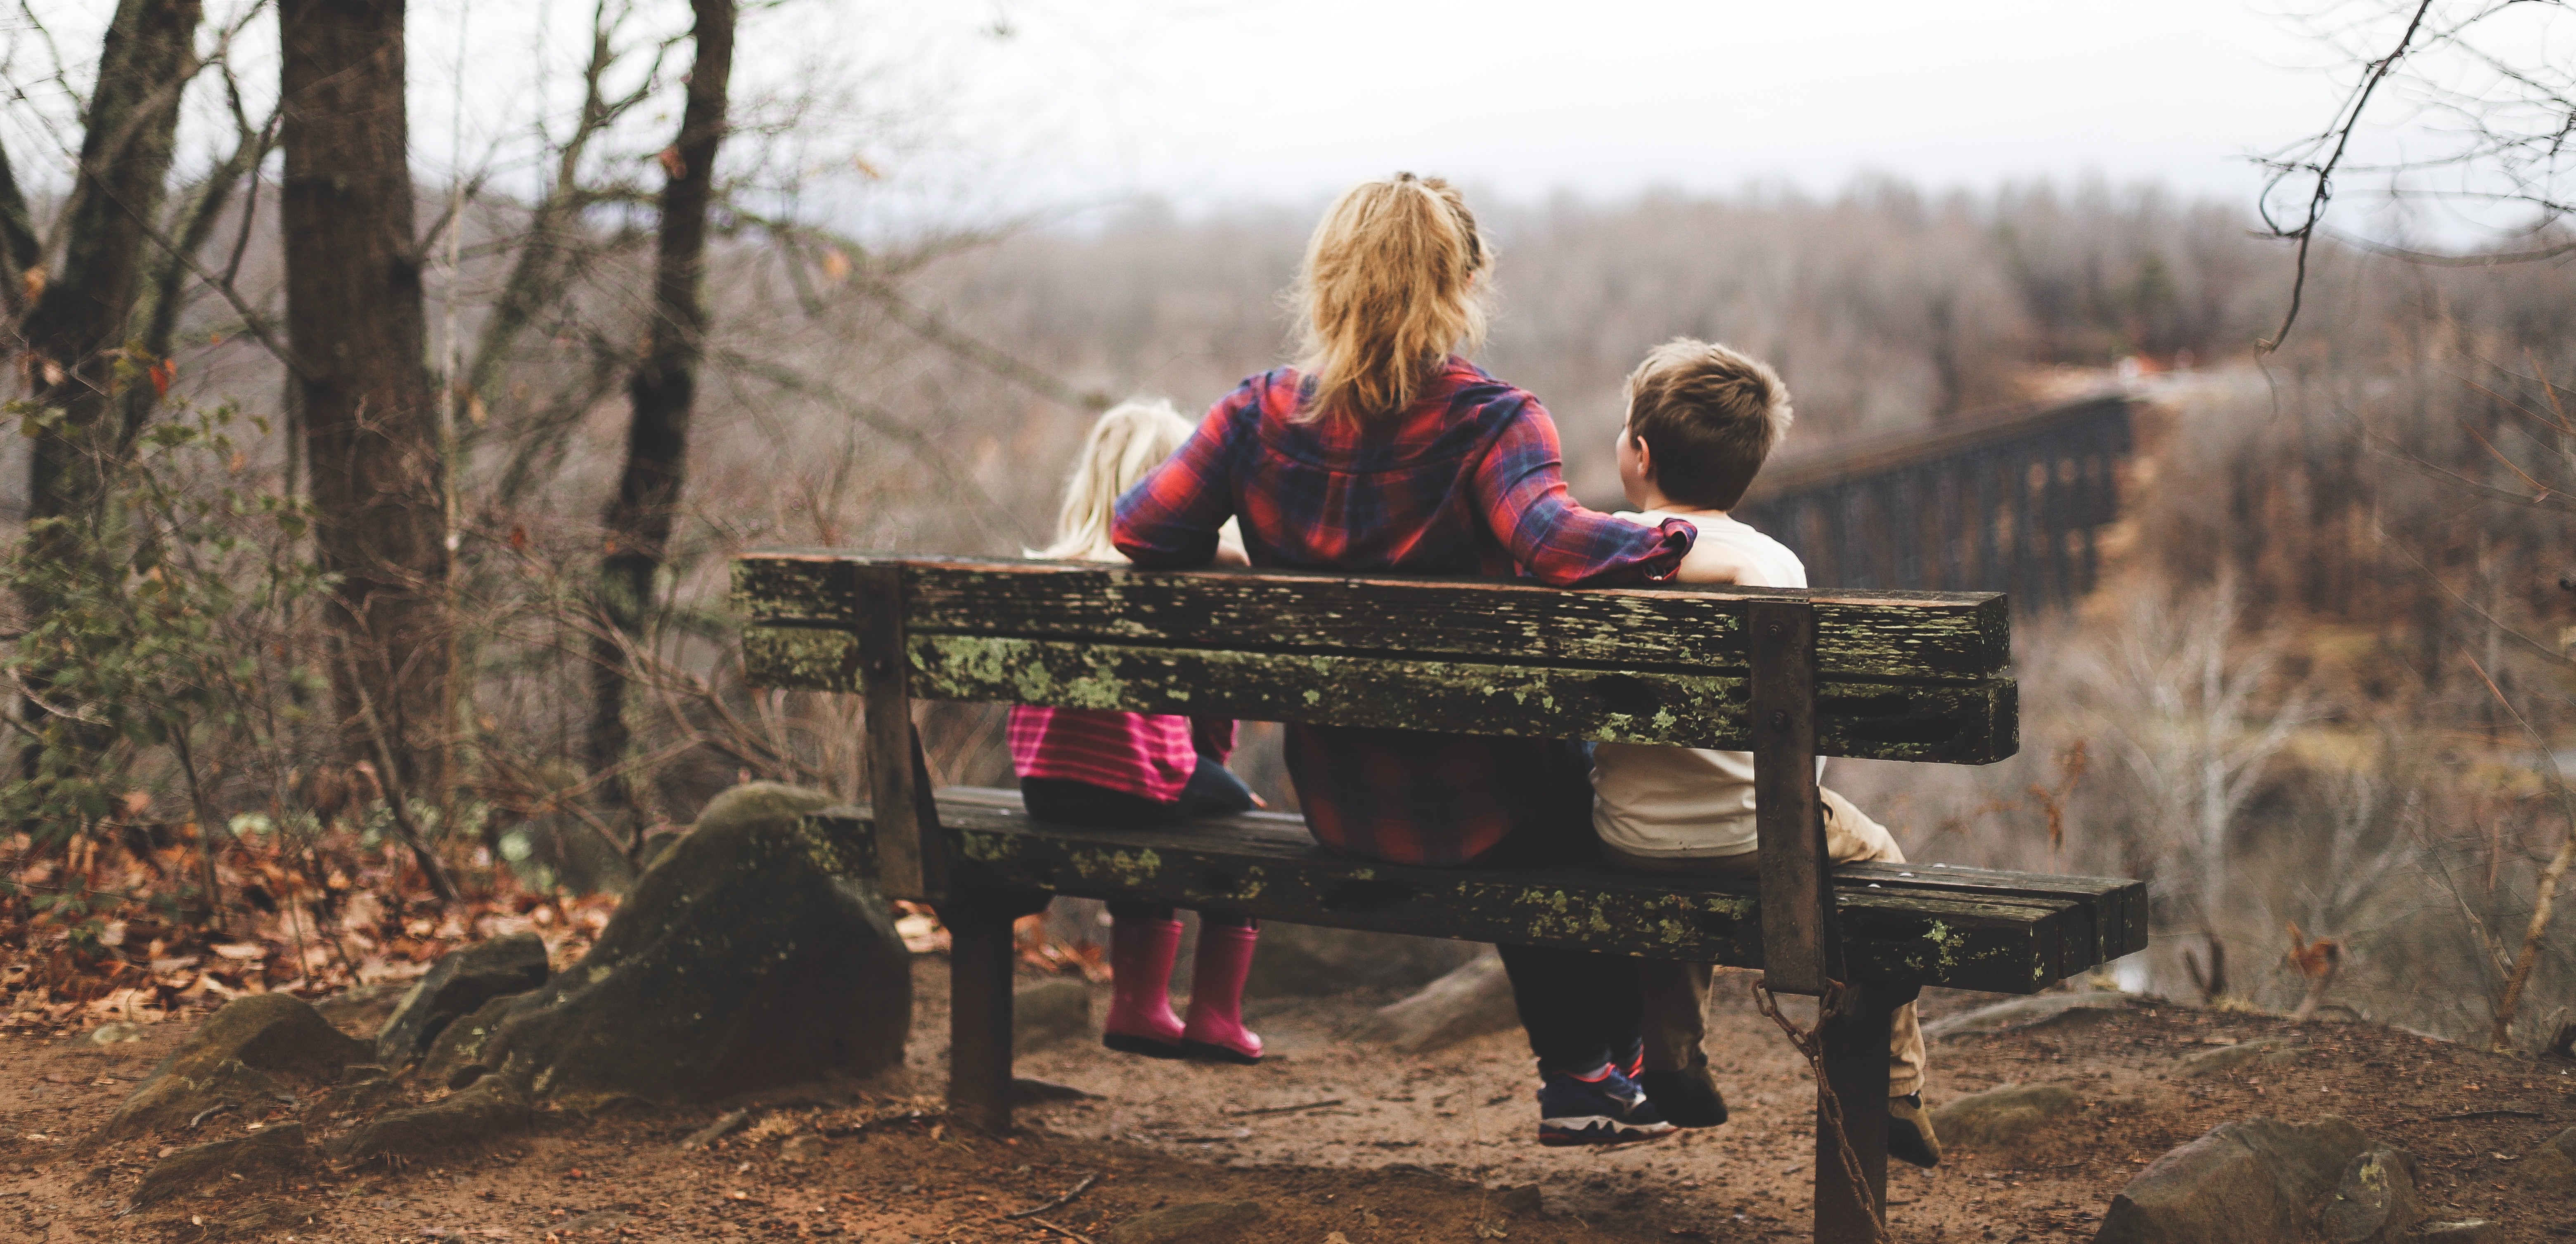 Woman and two children on a park bench; image by Benjamin Manley, via Unsplash.com.